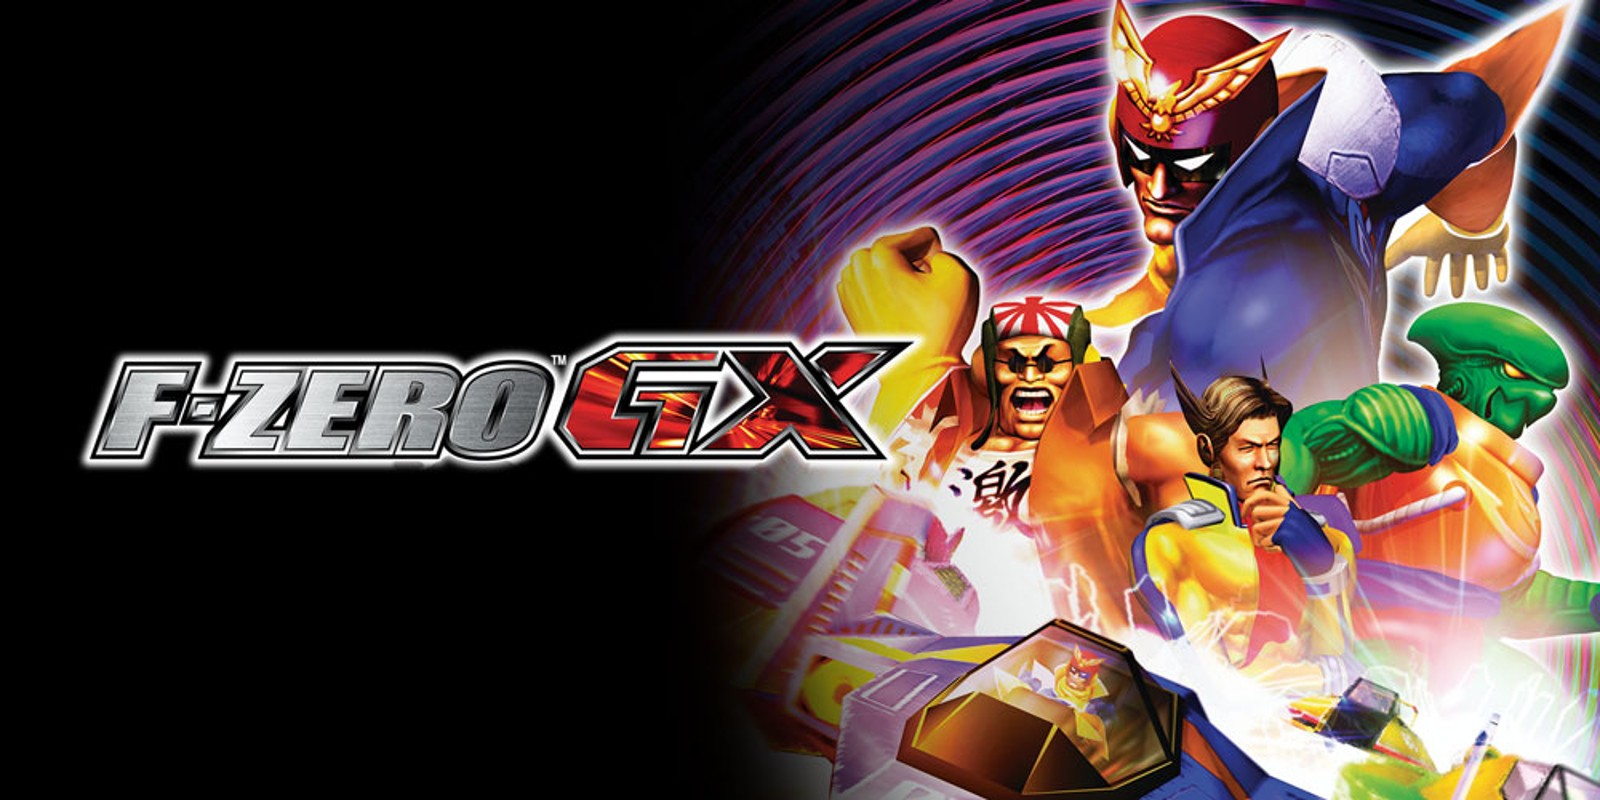 F Zero Gx Producer Toshihiro Nagoshi Open To Working On The Series Again Would Want New Game To Be Challenging Nintendo Everything